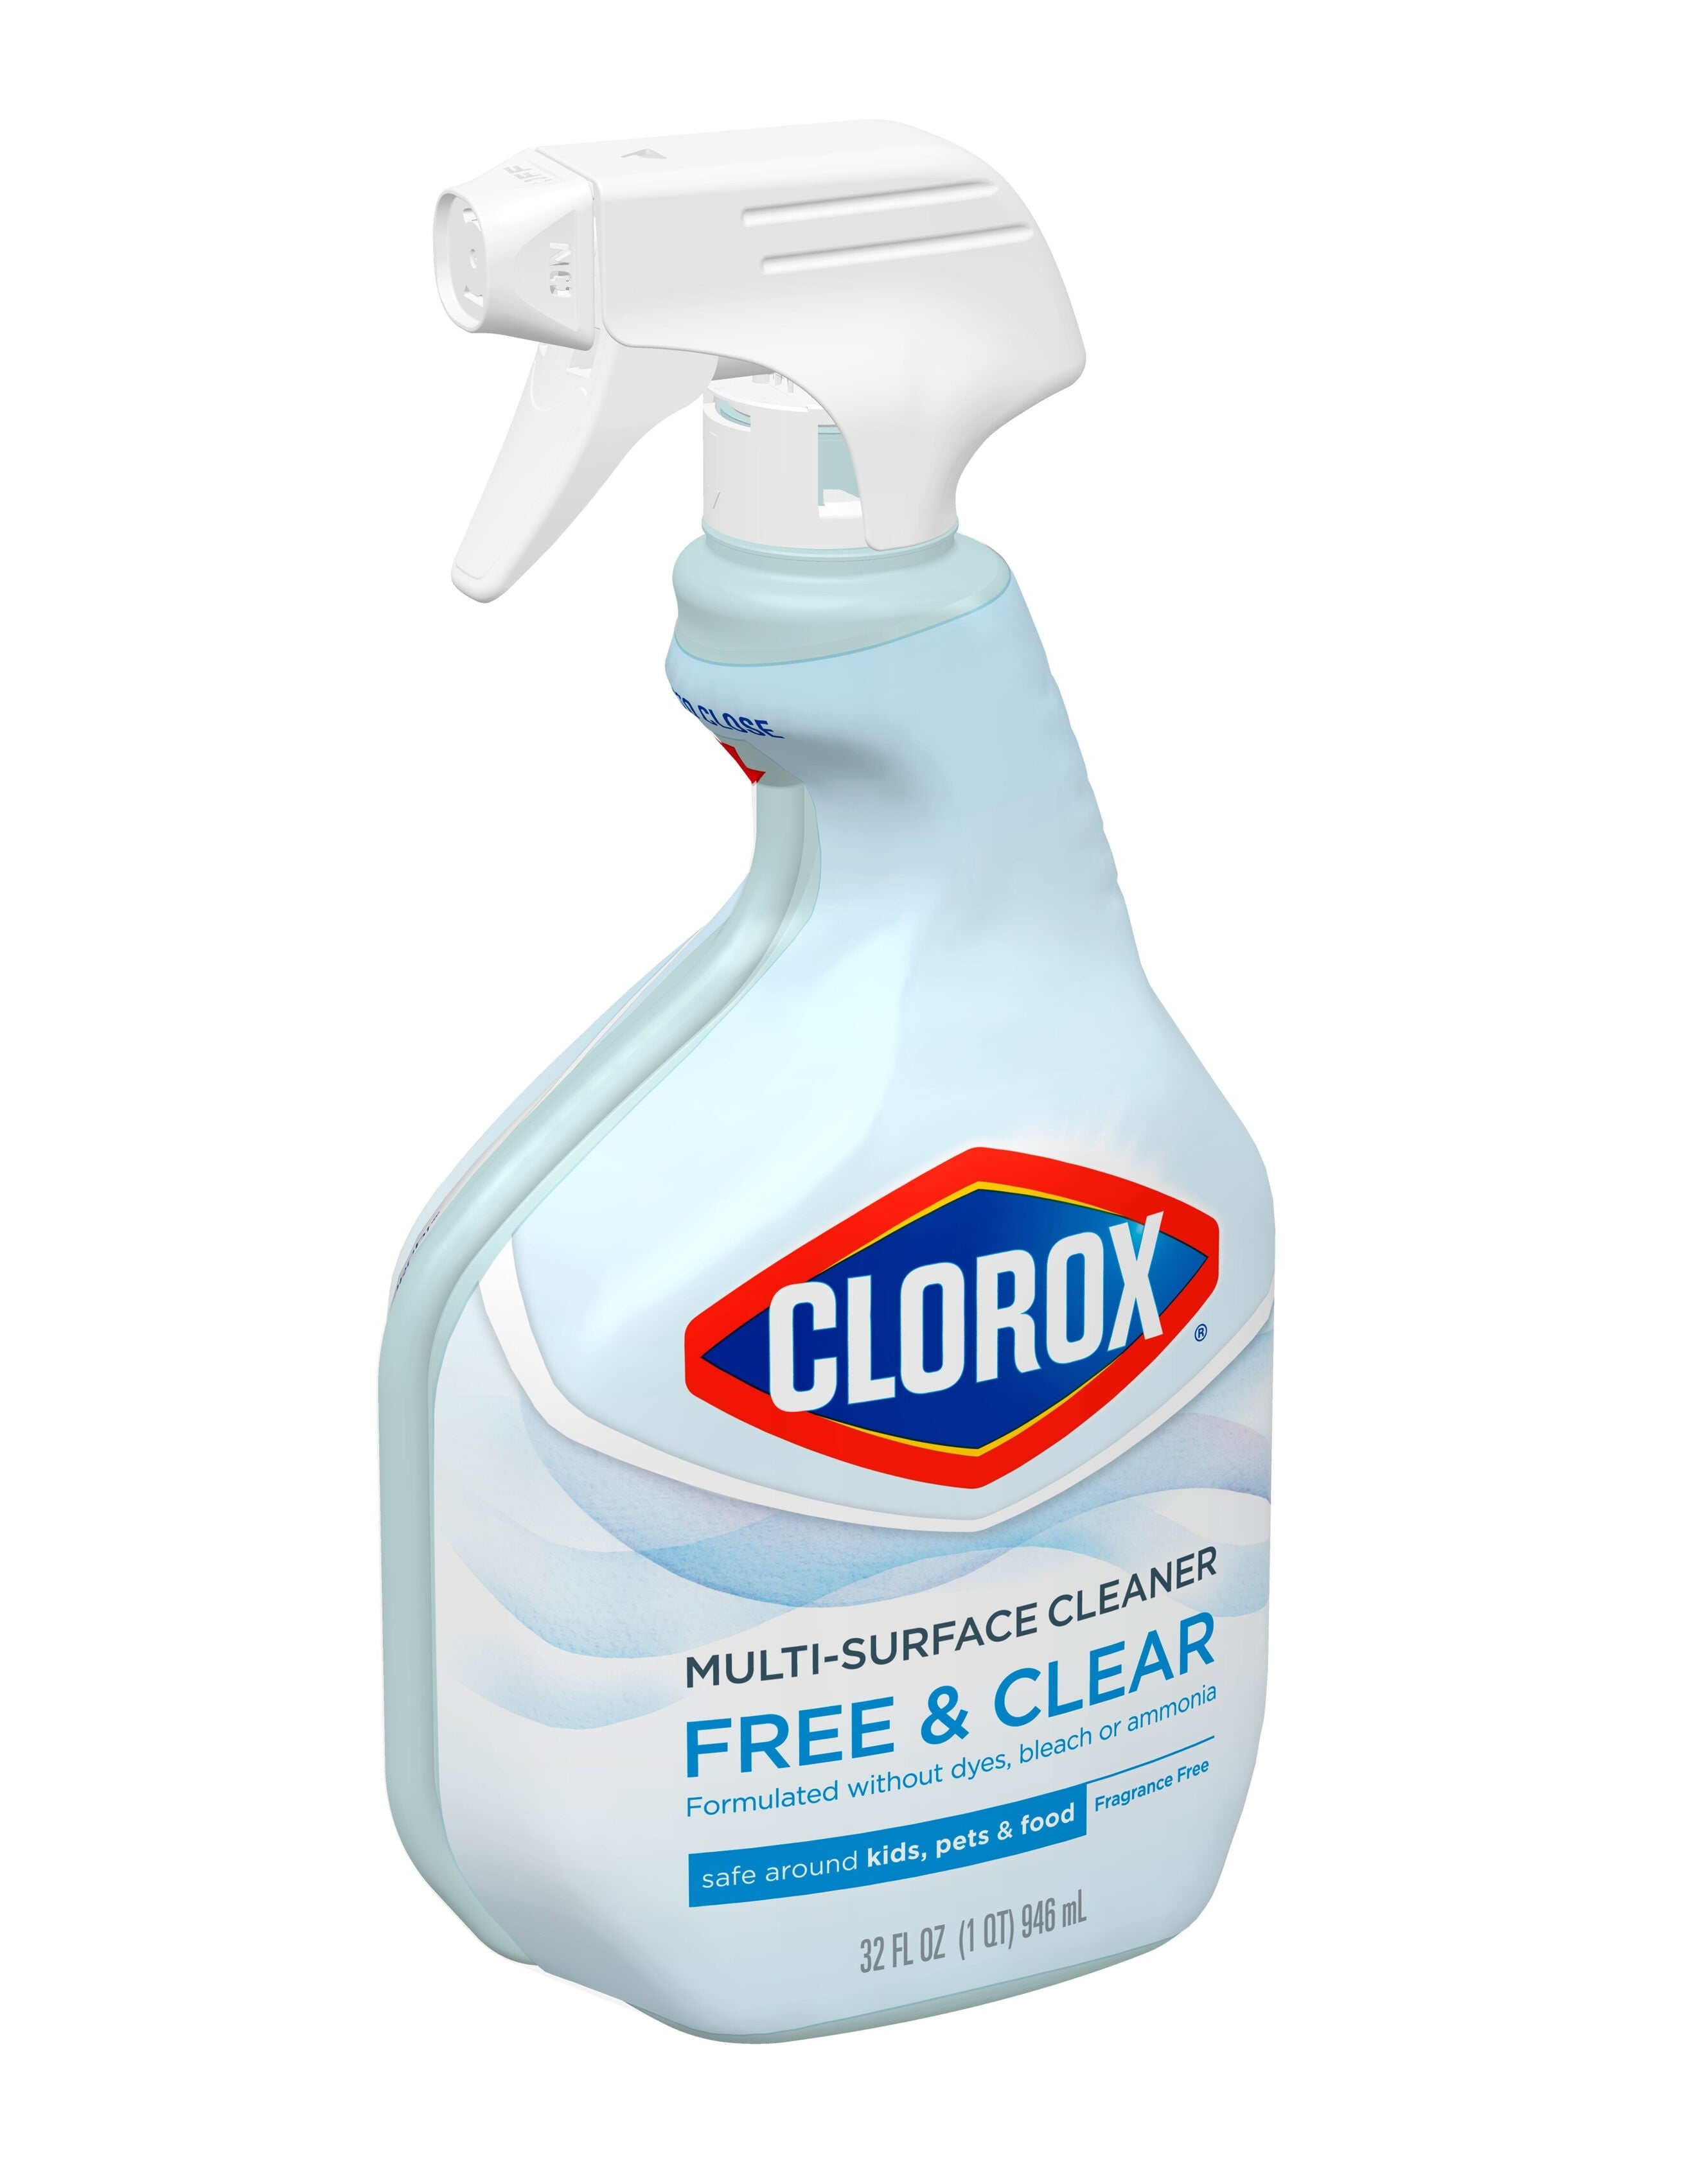 Clorox Multi-Surface Cleaner Free & Clear of Fragrances & Dyes - 32oz/9pk